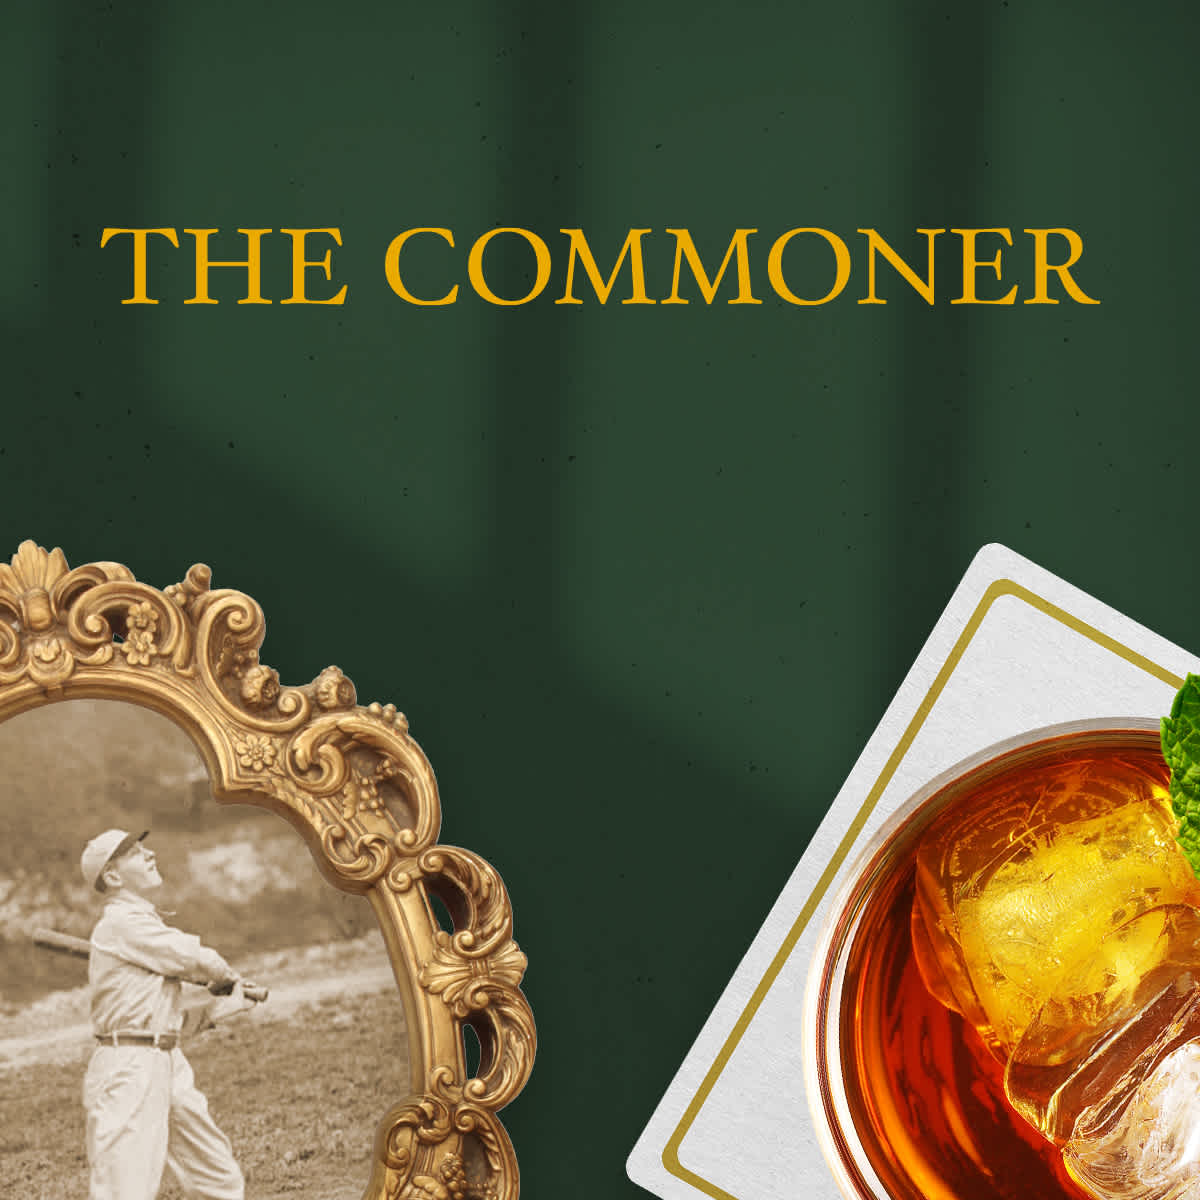 A square image of The Commoner restaurant logo on top of a green background with a picture frame tchotchke and an old fashioned cocktail from above.